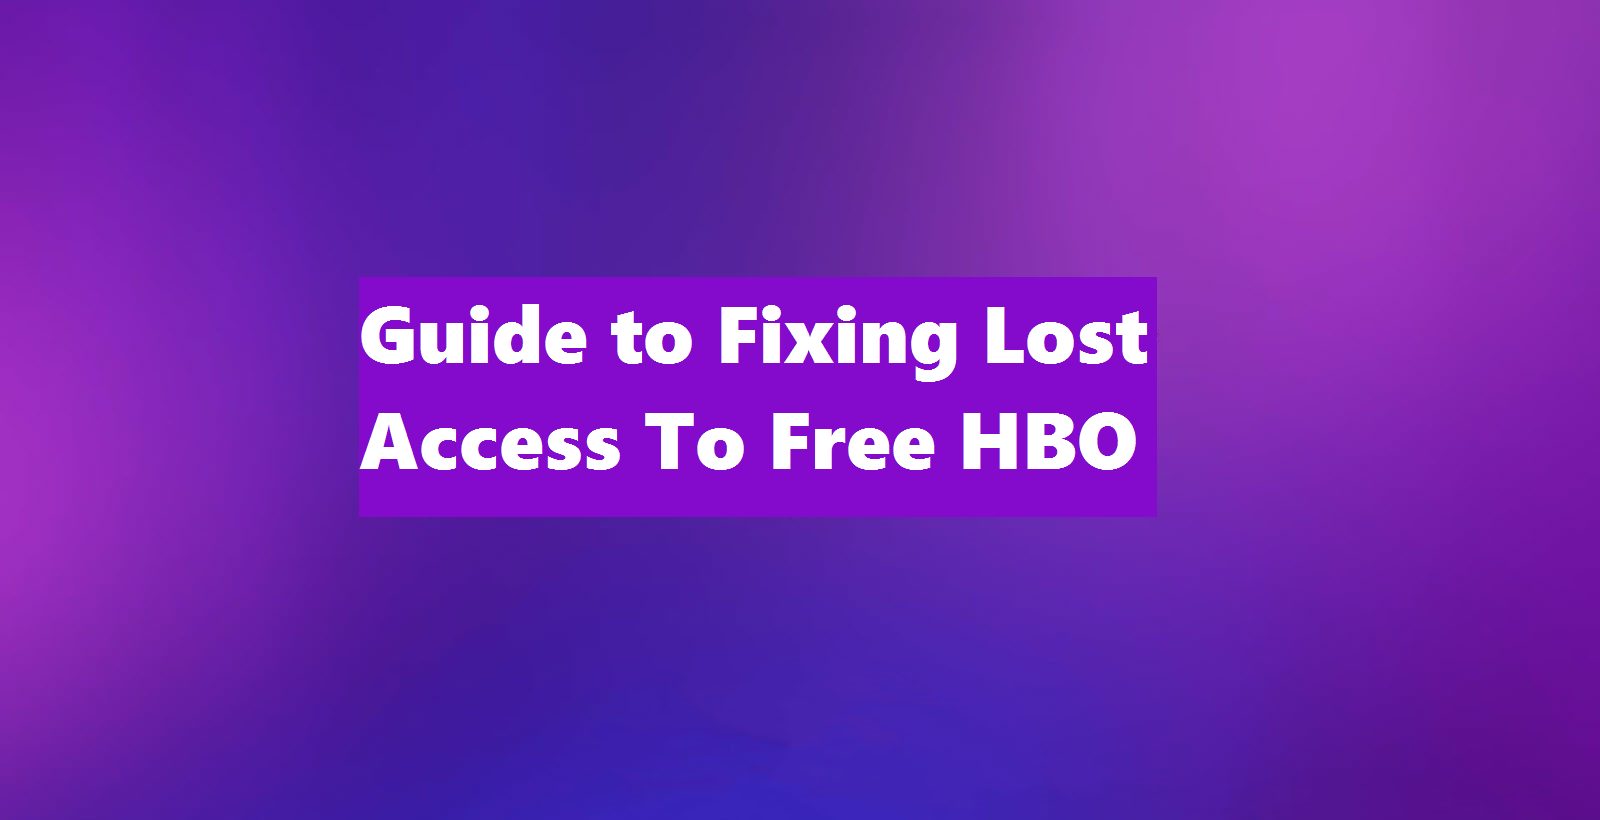 Guide to Fixing Lost Access To Free HBO